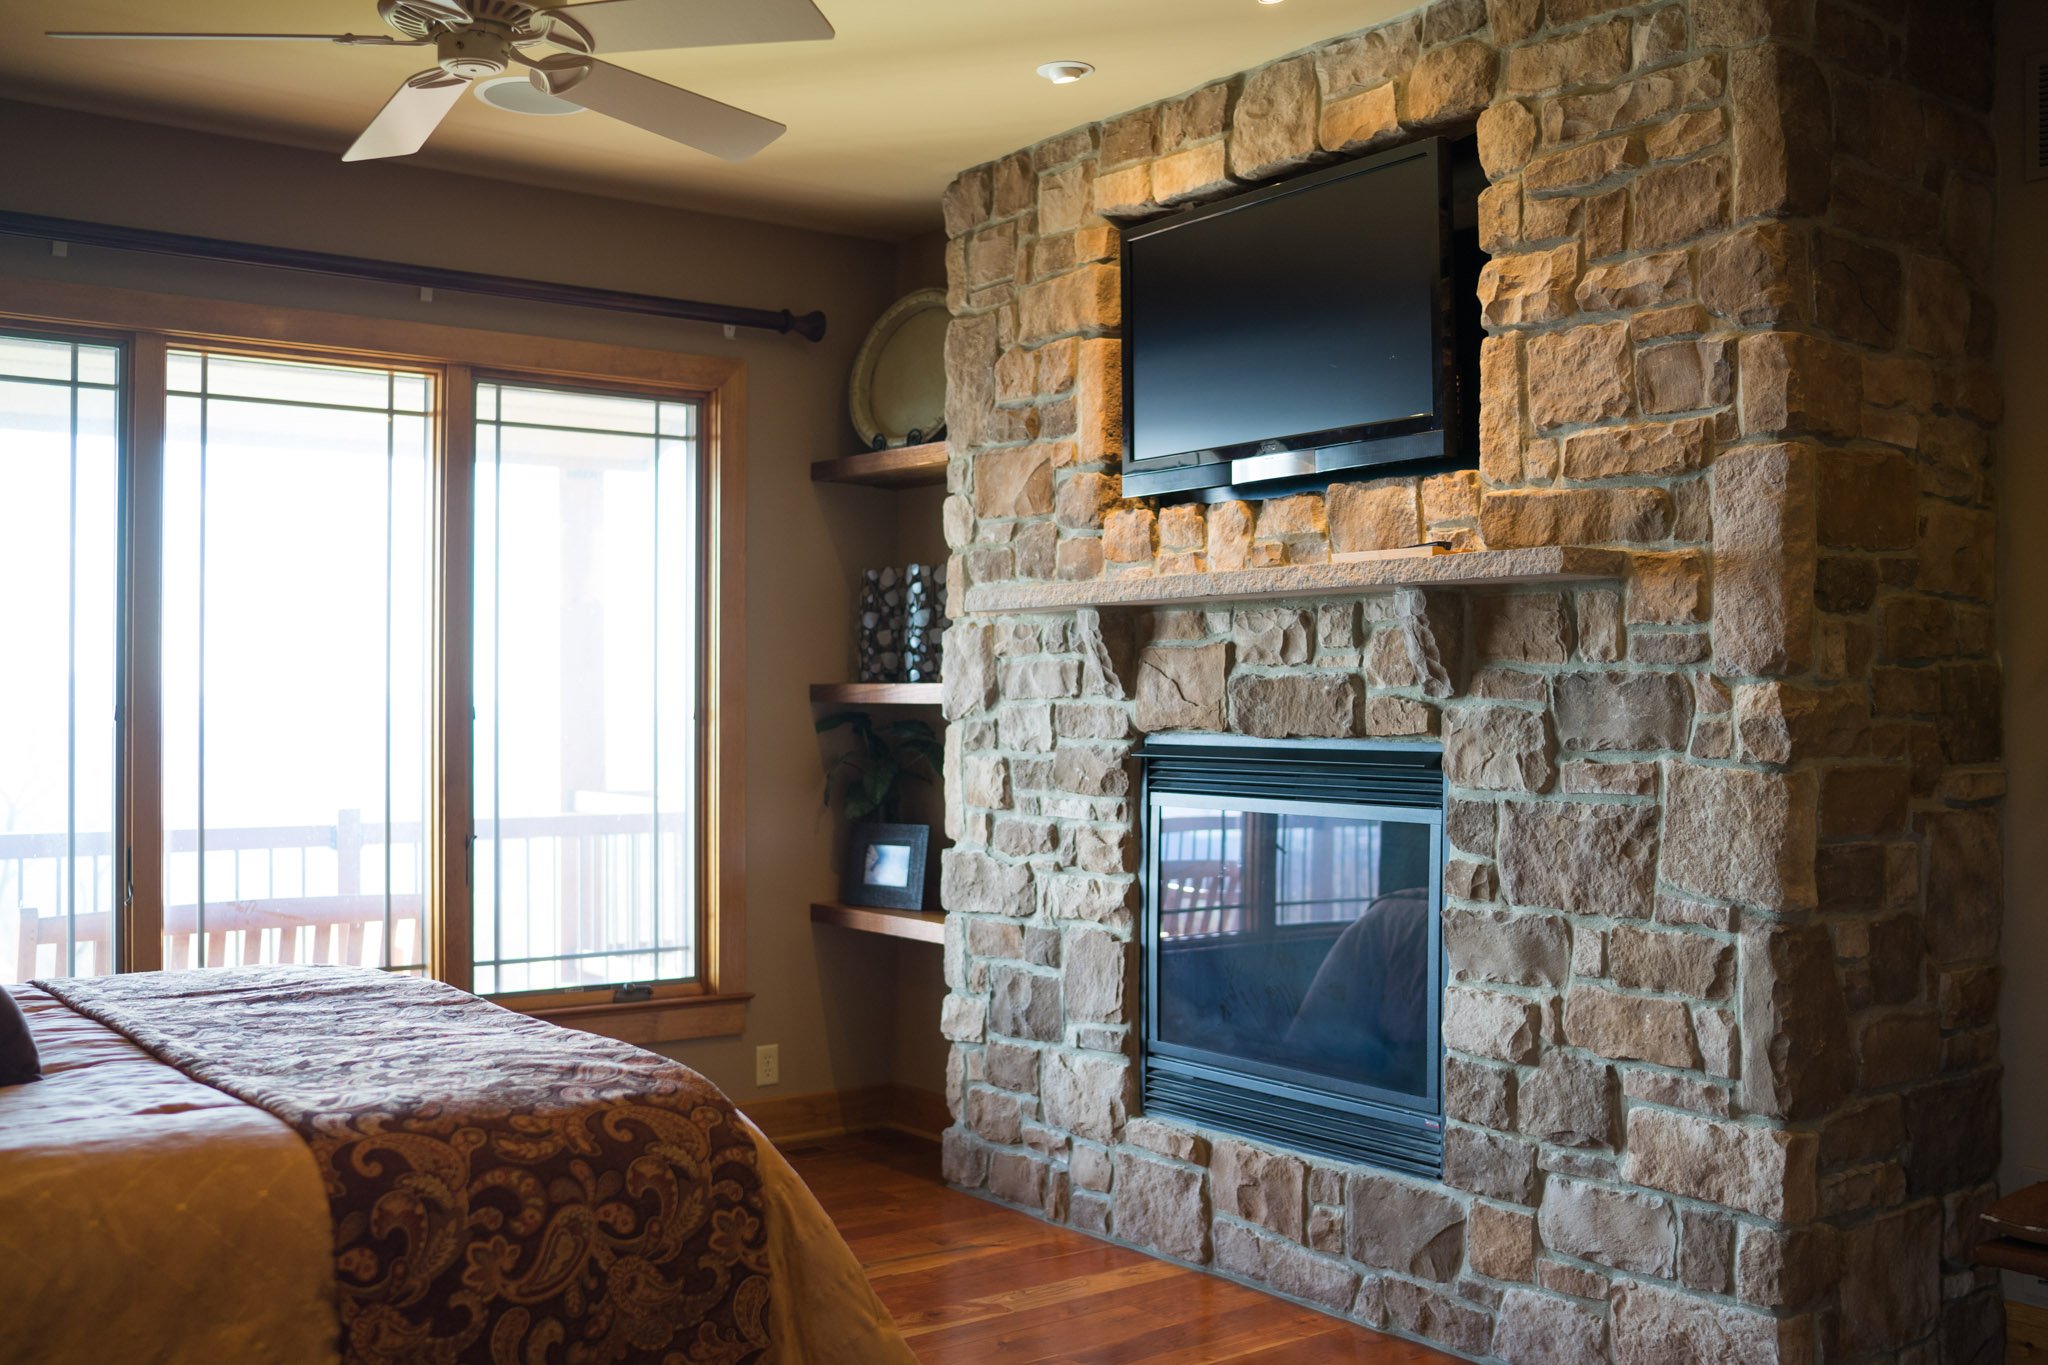 With Hostetter Custom Homes, your home is a canvas of endless possibilities. Imagine cozying up by a custom stone fireplace that anchors your living space &mdash; just one of the countless ways we can tailor every corner to your vision.

#shenandoahv